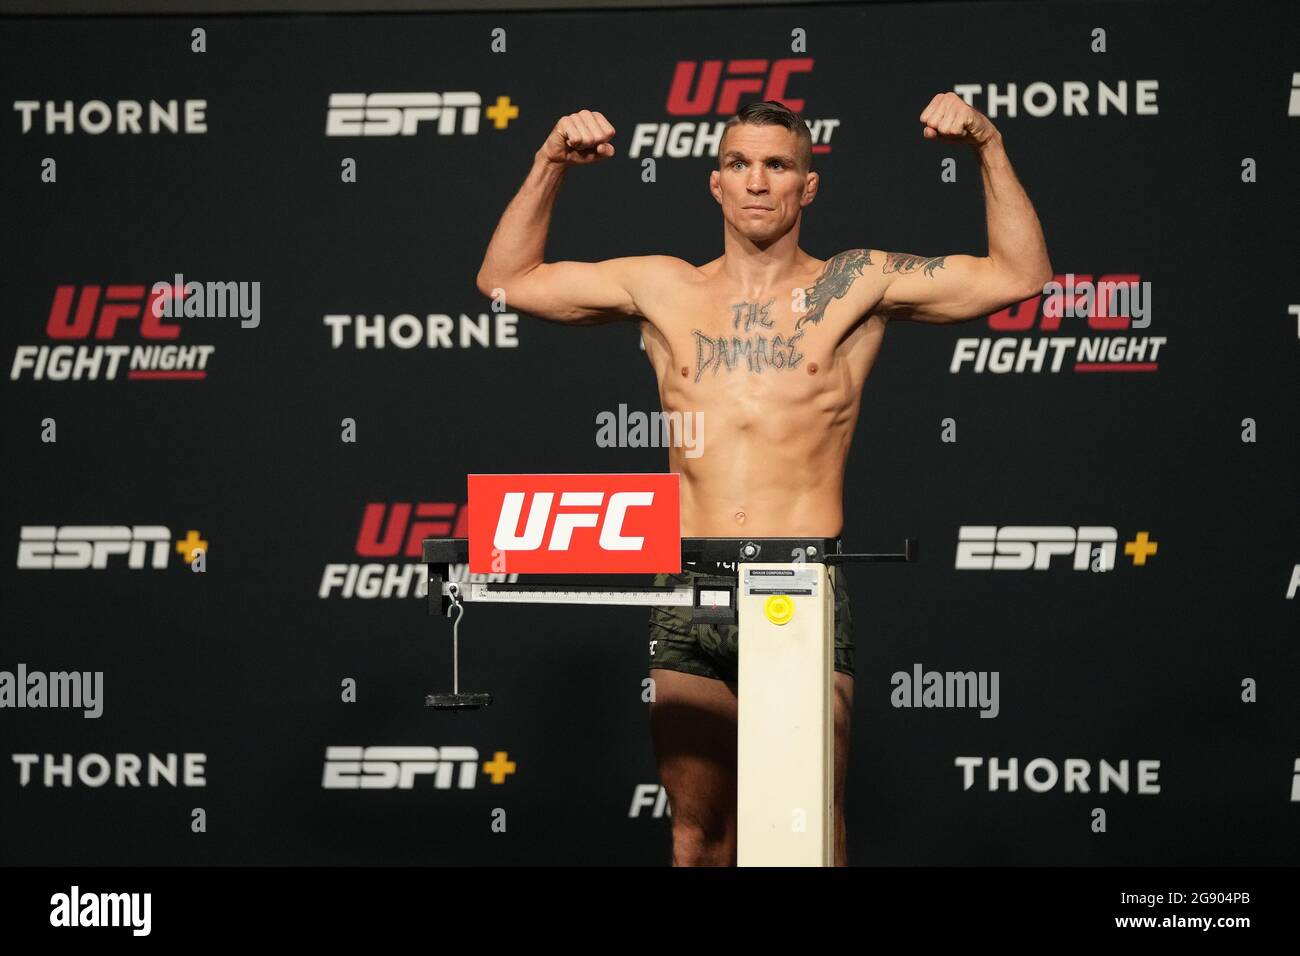 Las Vegas, USA. 23rd July, 2021. Las Vegas, NV - JULY 23:Darren Elkins steps on the scale for the official weigh-ins during UFC Fight Night Vegas 32 - Weigh-in at UFC APEX on July 23, 2021 in Las Vegas, NV, United States. (Photo by Louis Grasse/PxImages) Credit: Px Images/Alamy Live News Stock Photo